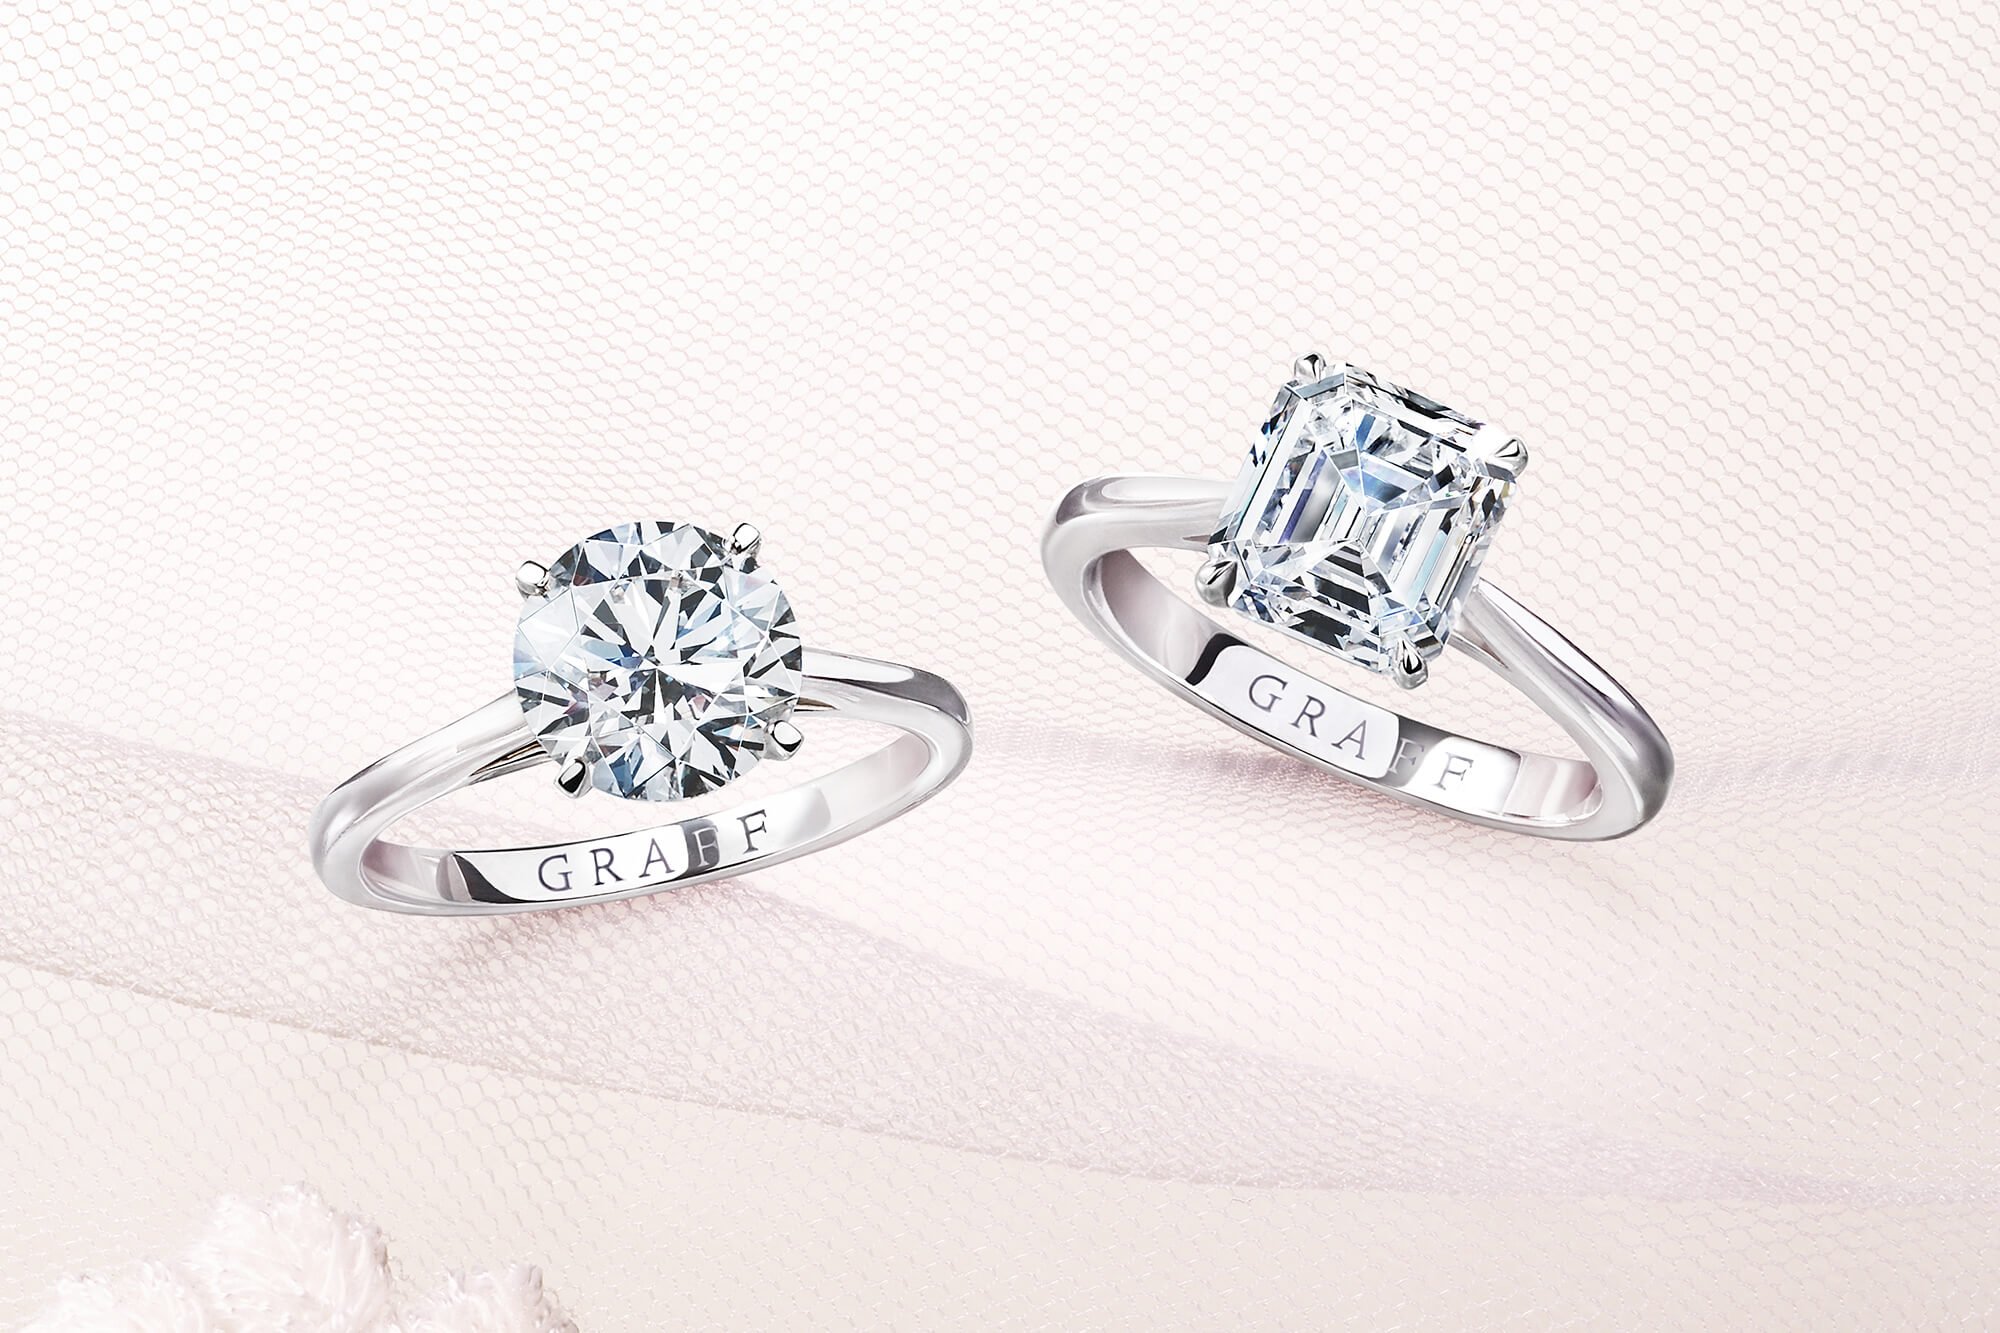 Paragon Round Diamond Engagement Ring and Paragon Emerald Cut Diamond Engagement Ring from the Graff bridal jewellery collection